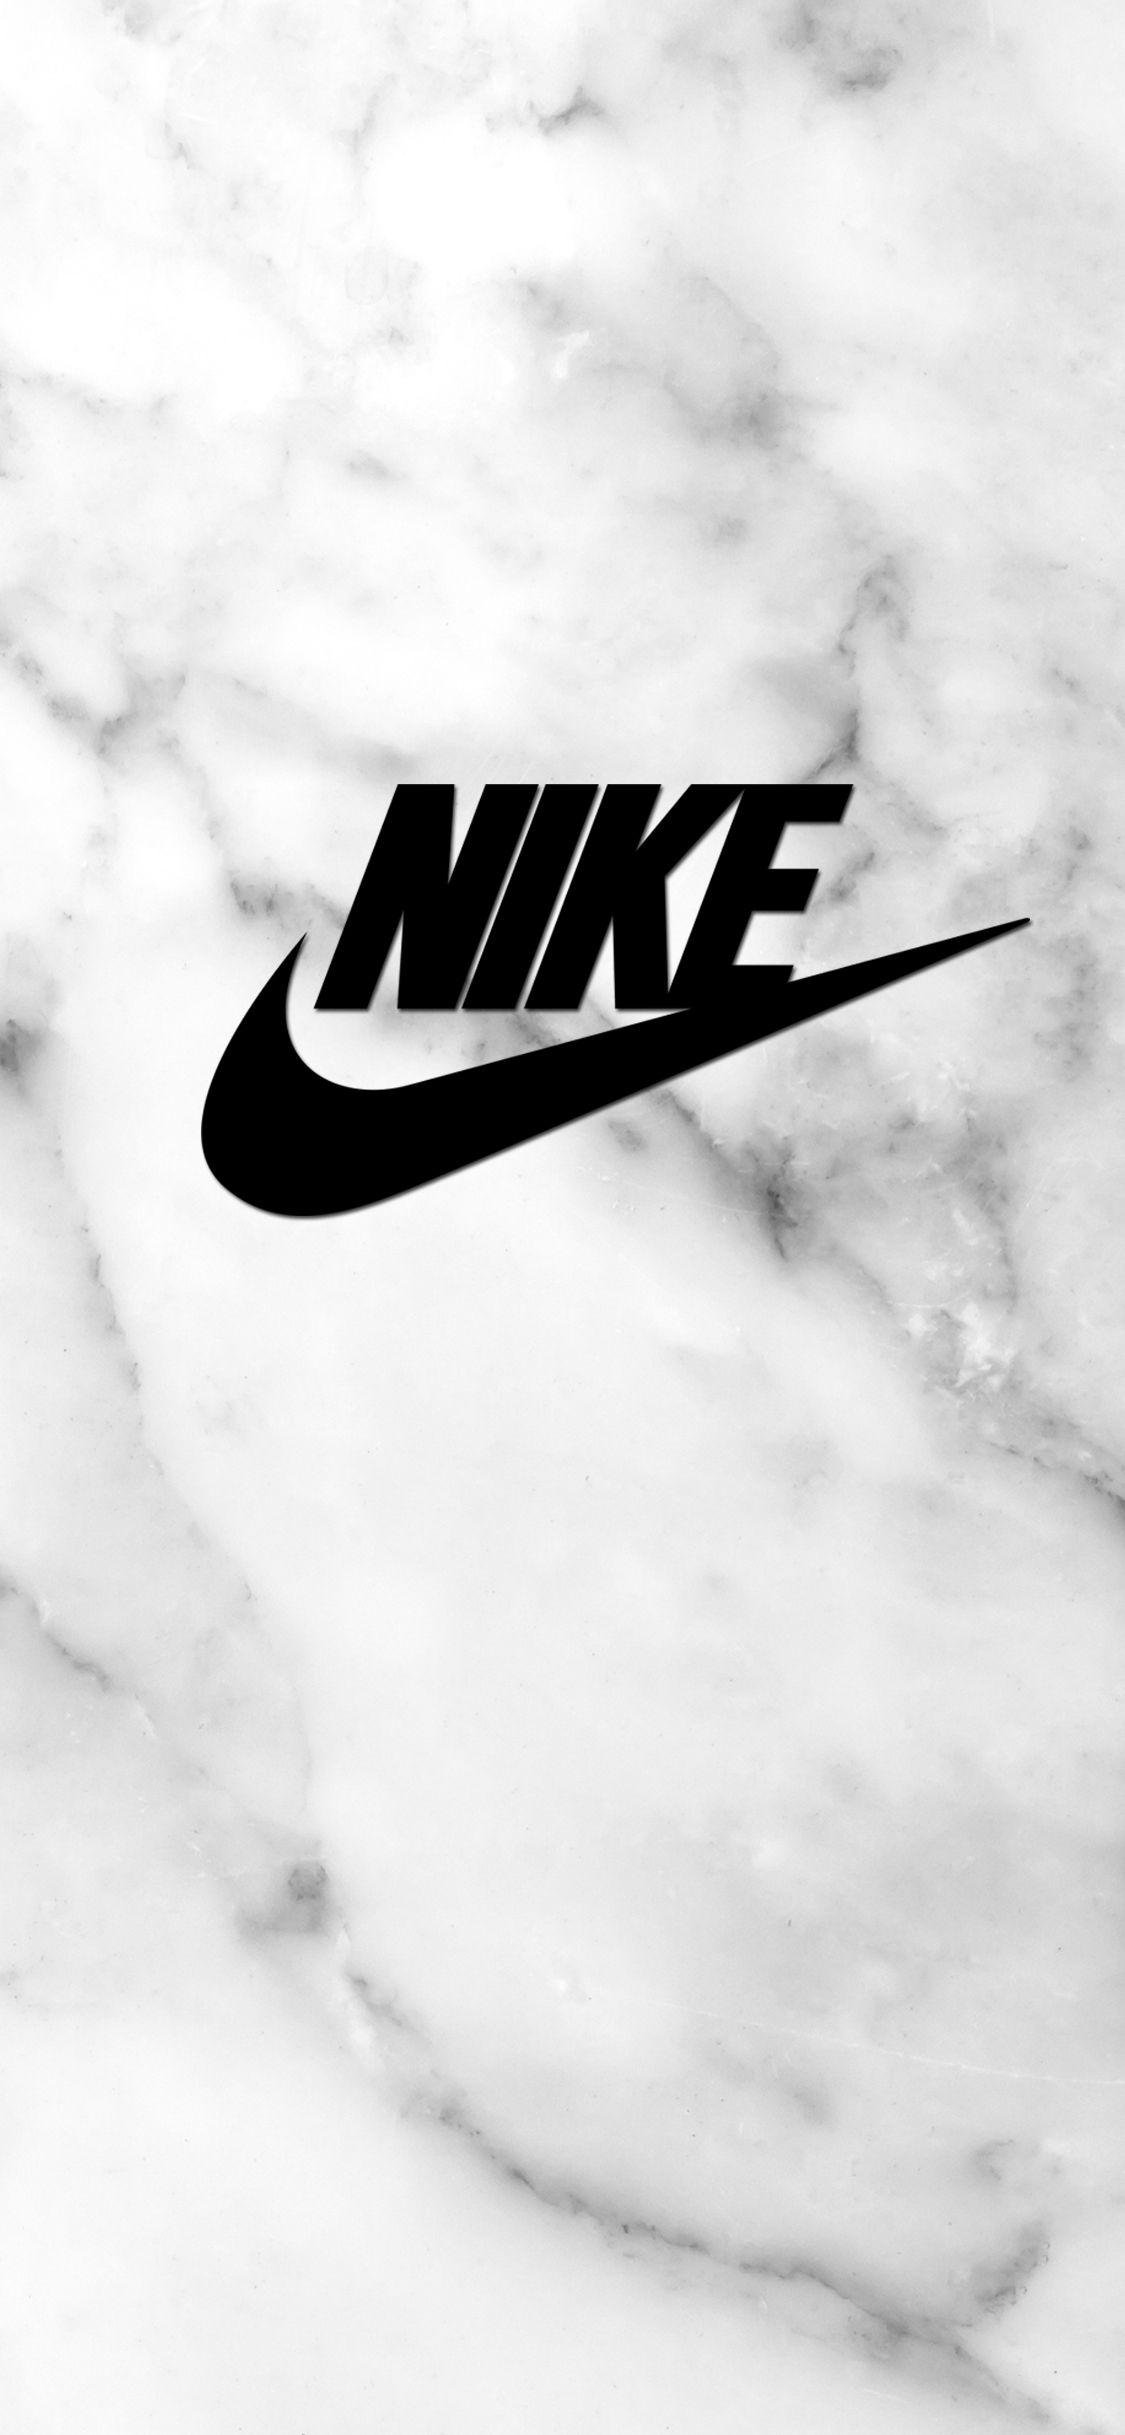 Nike iPhone X wallpaper You can order iphone case with this